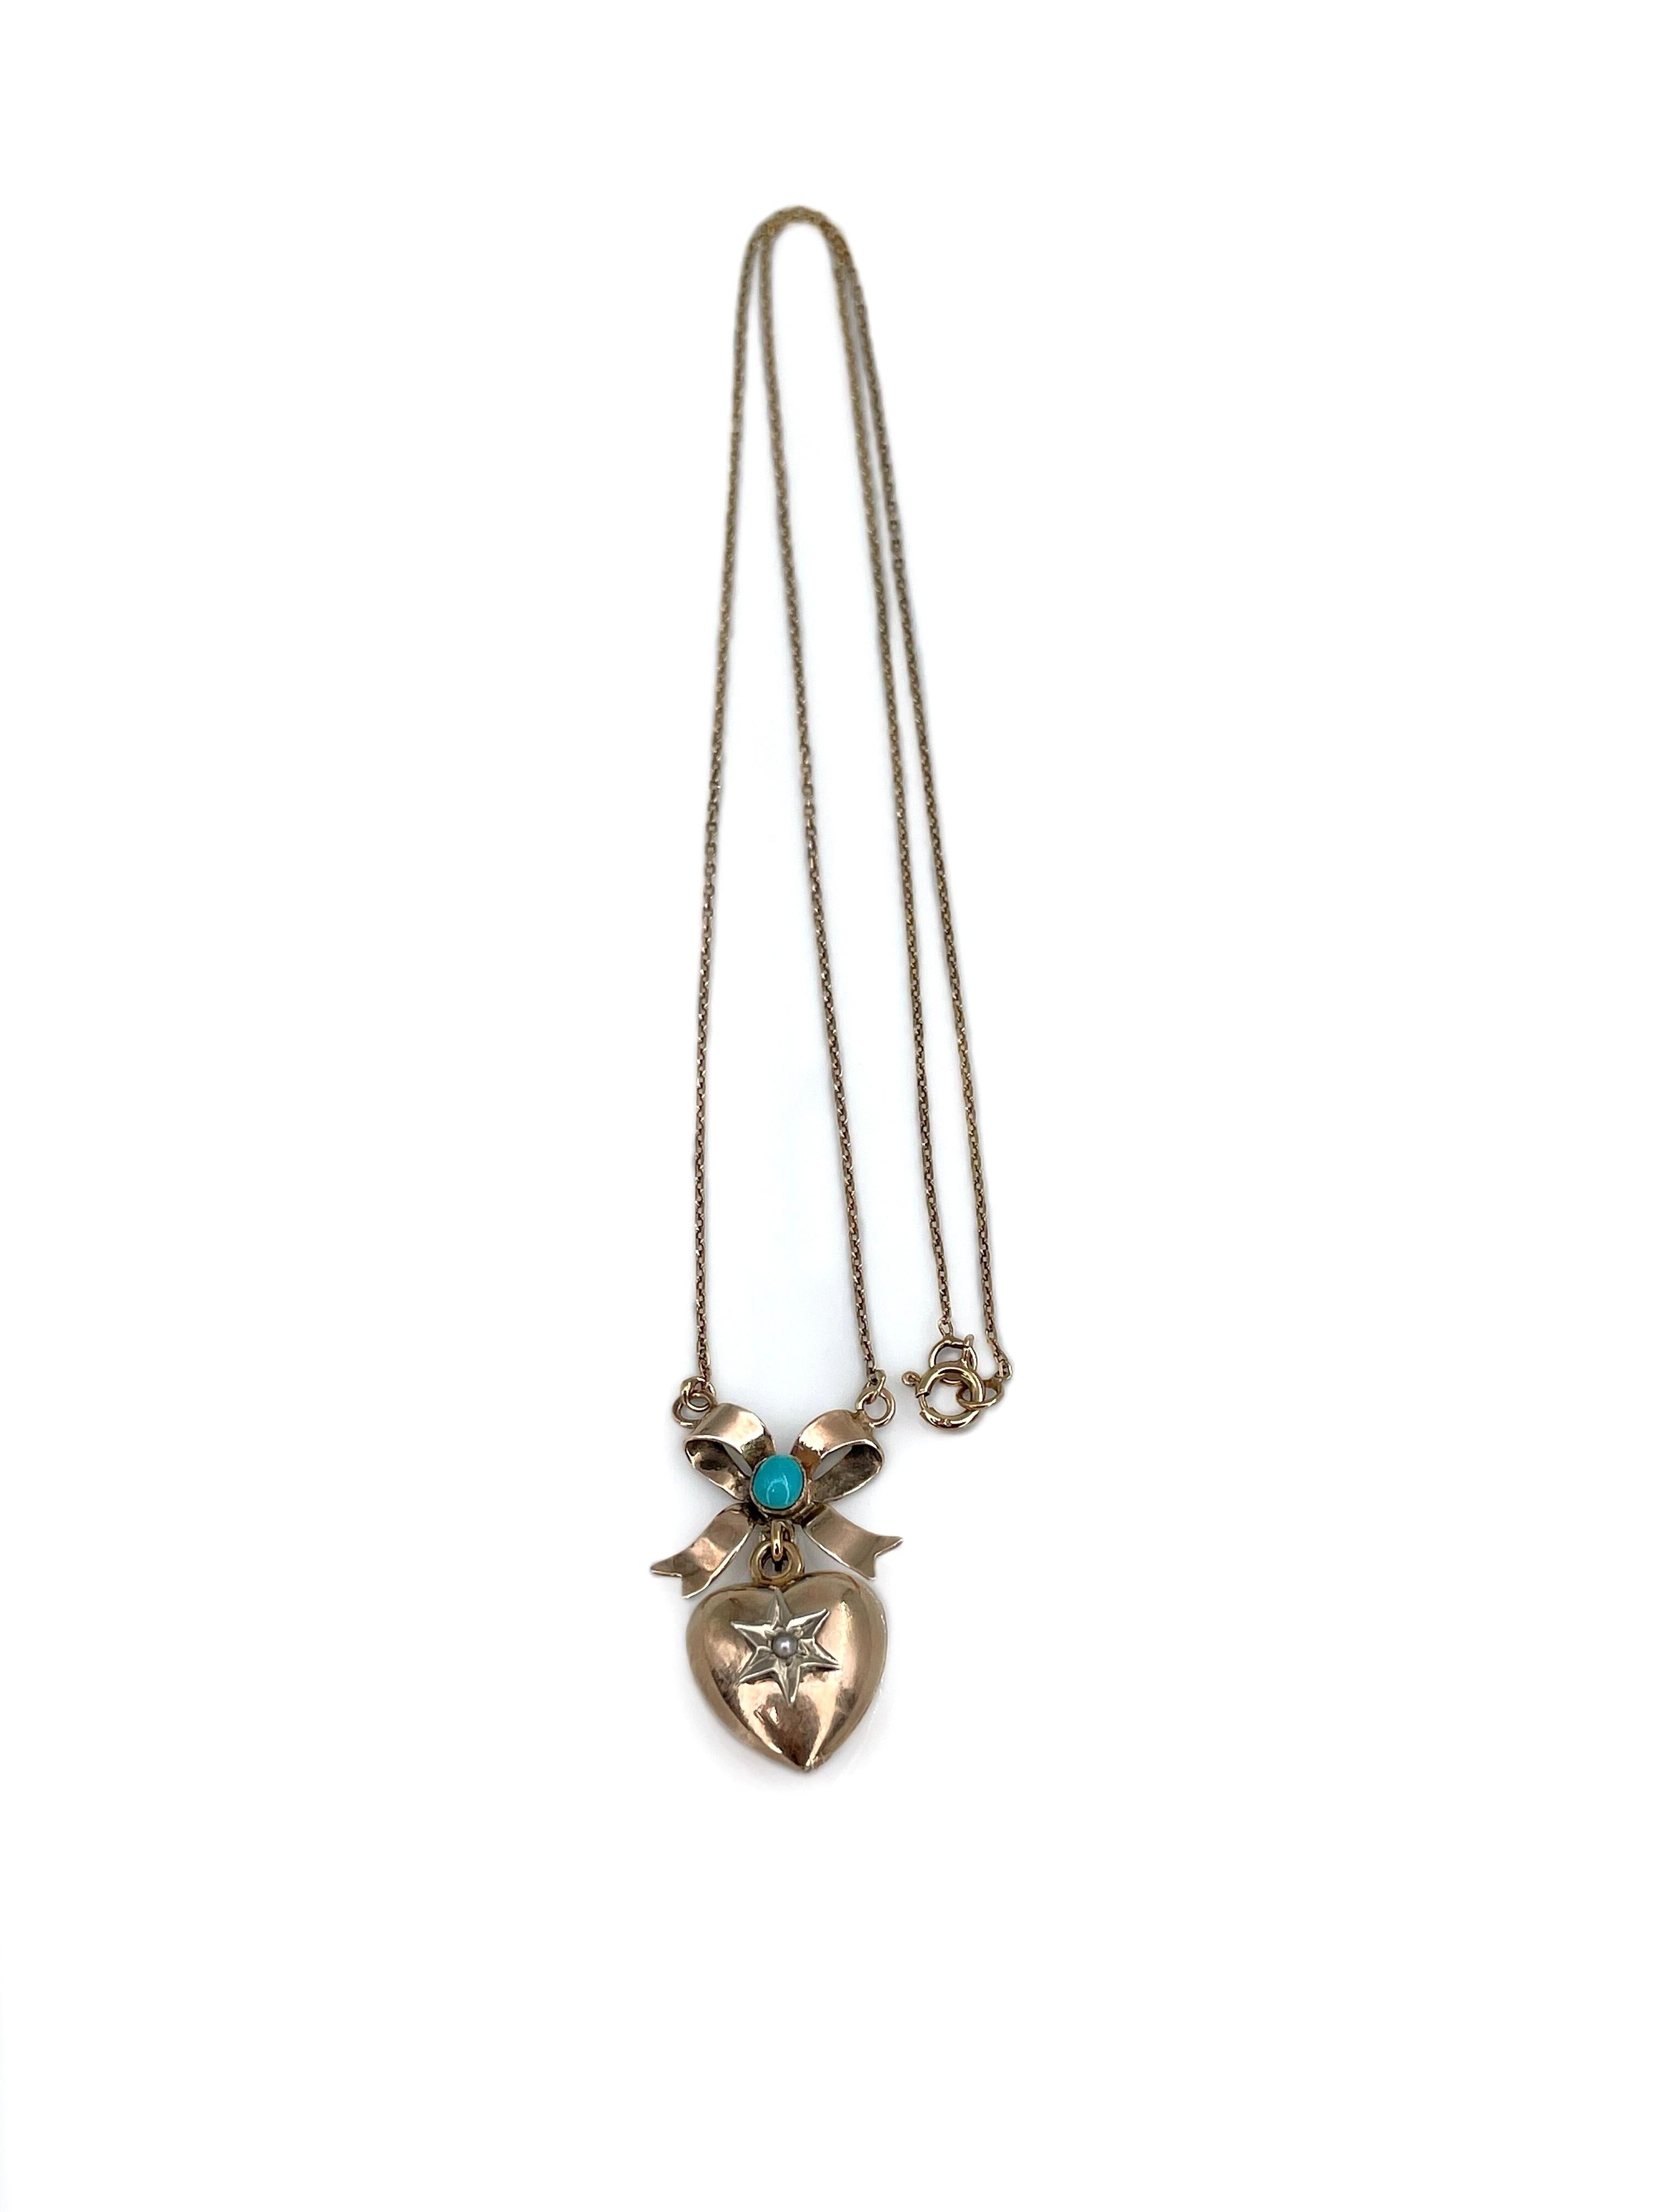 This is an elegant Victorian bow heart pendant chain necklace crafted in 9K gold. The piece features cabochon cut turquoise and seed pearl. 

The chain is thin.

Weight: 2.31g
Pendant length: 2.5cm
Chain length: 41.5cm

———

If you have any